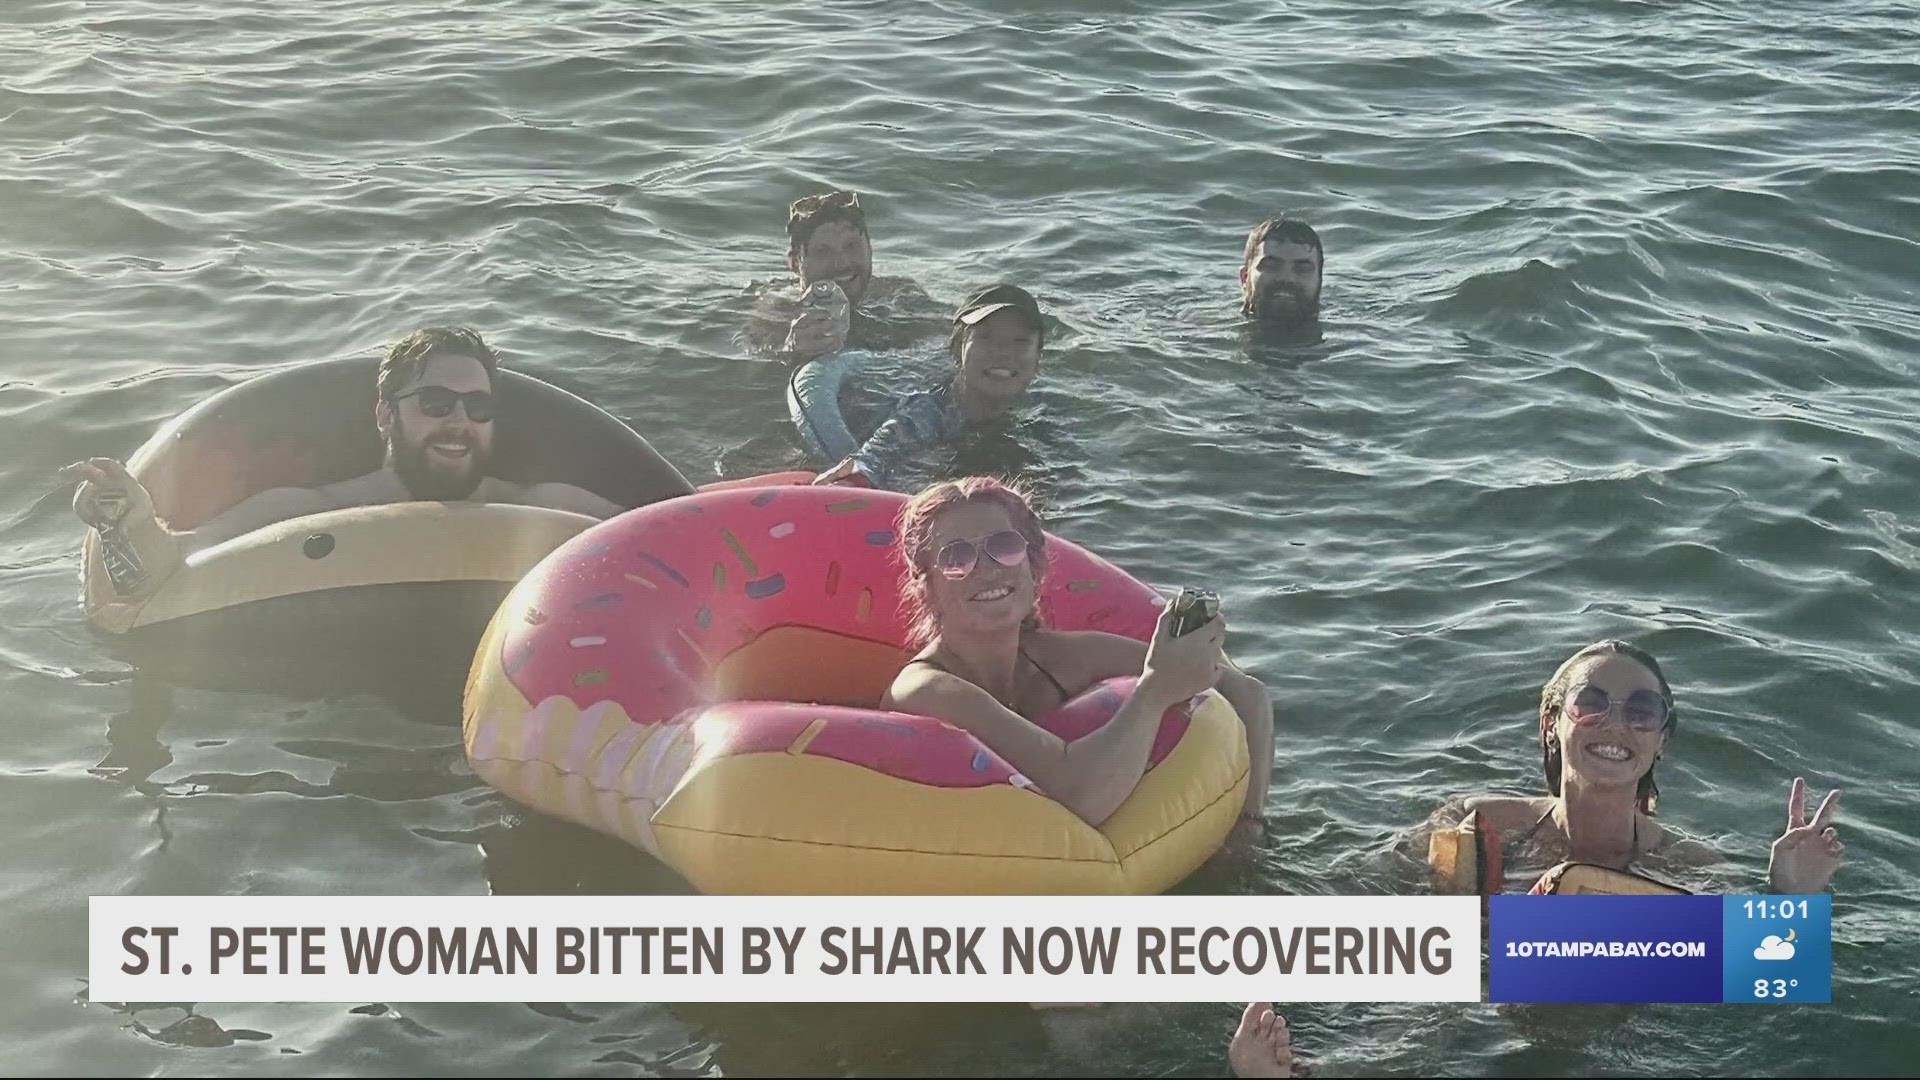 The shark attack happened near the St. Pete Pier last weekend.